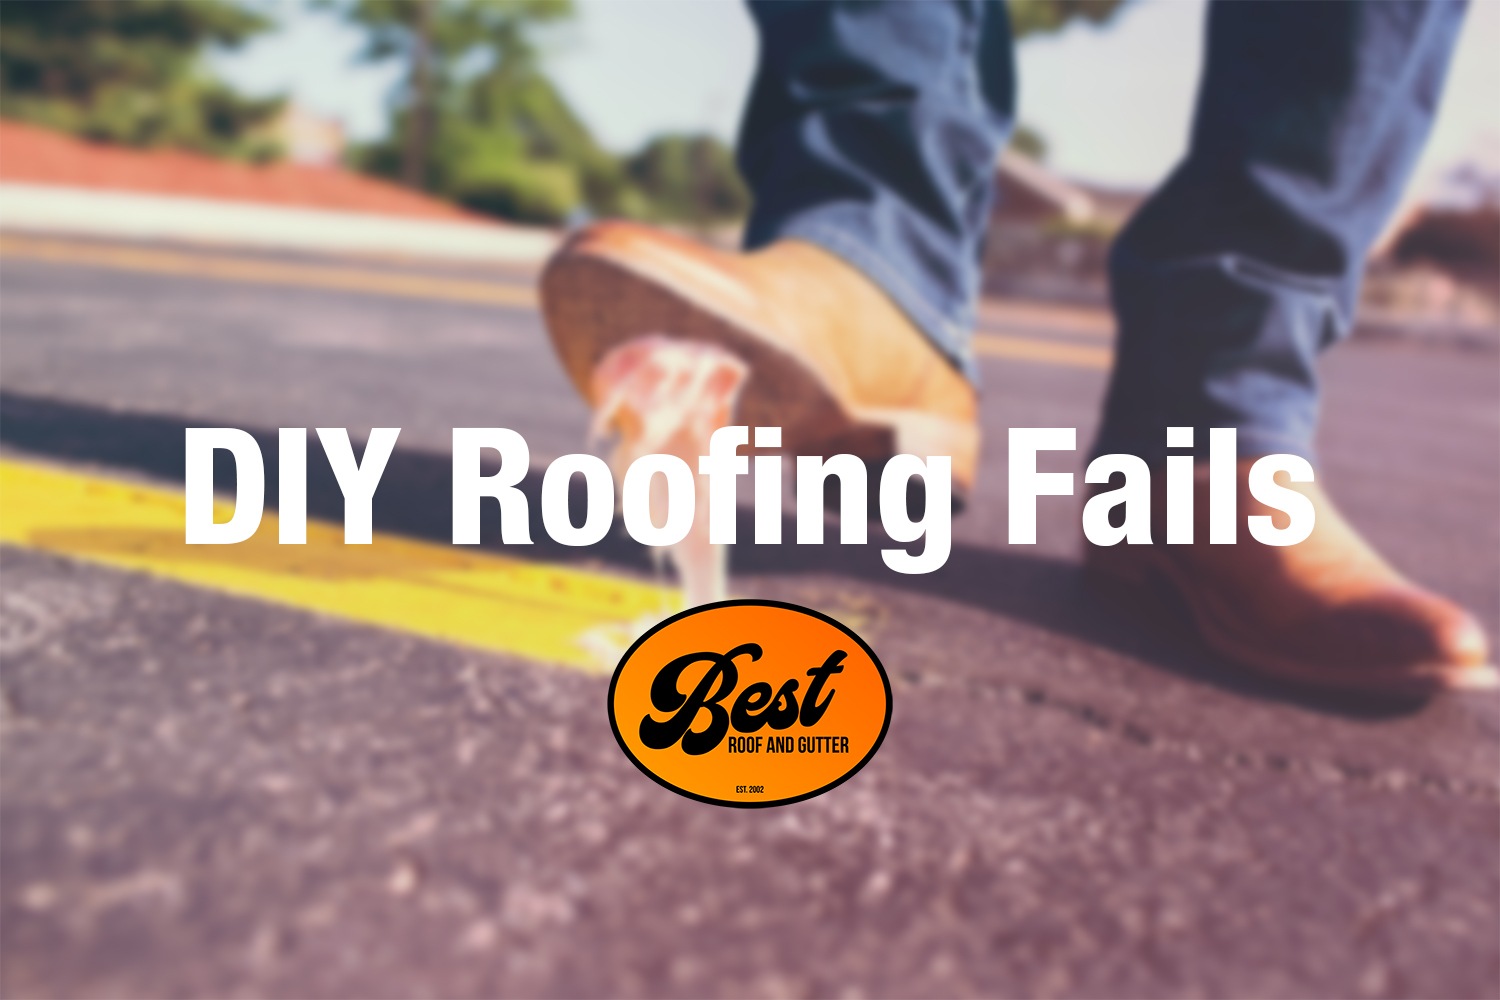 DIY Roofing Fails